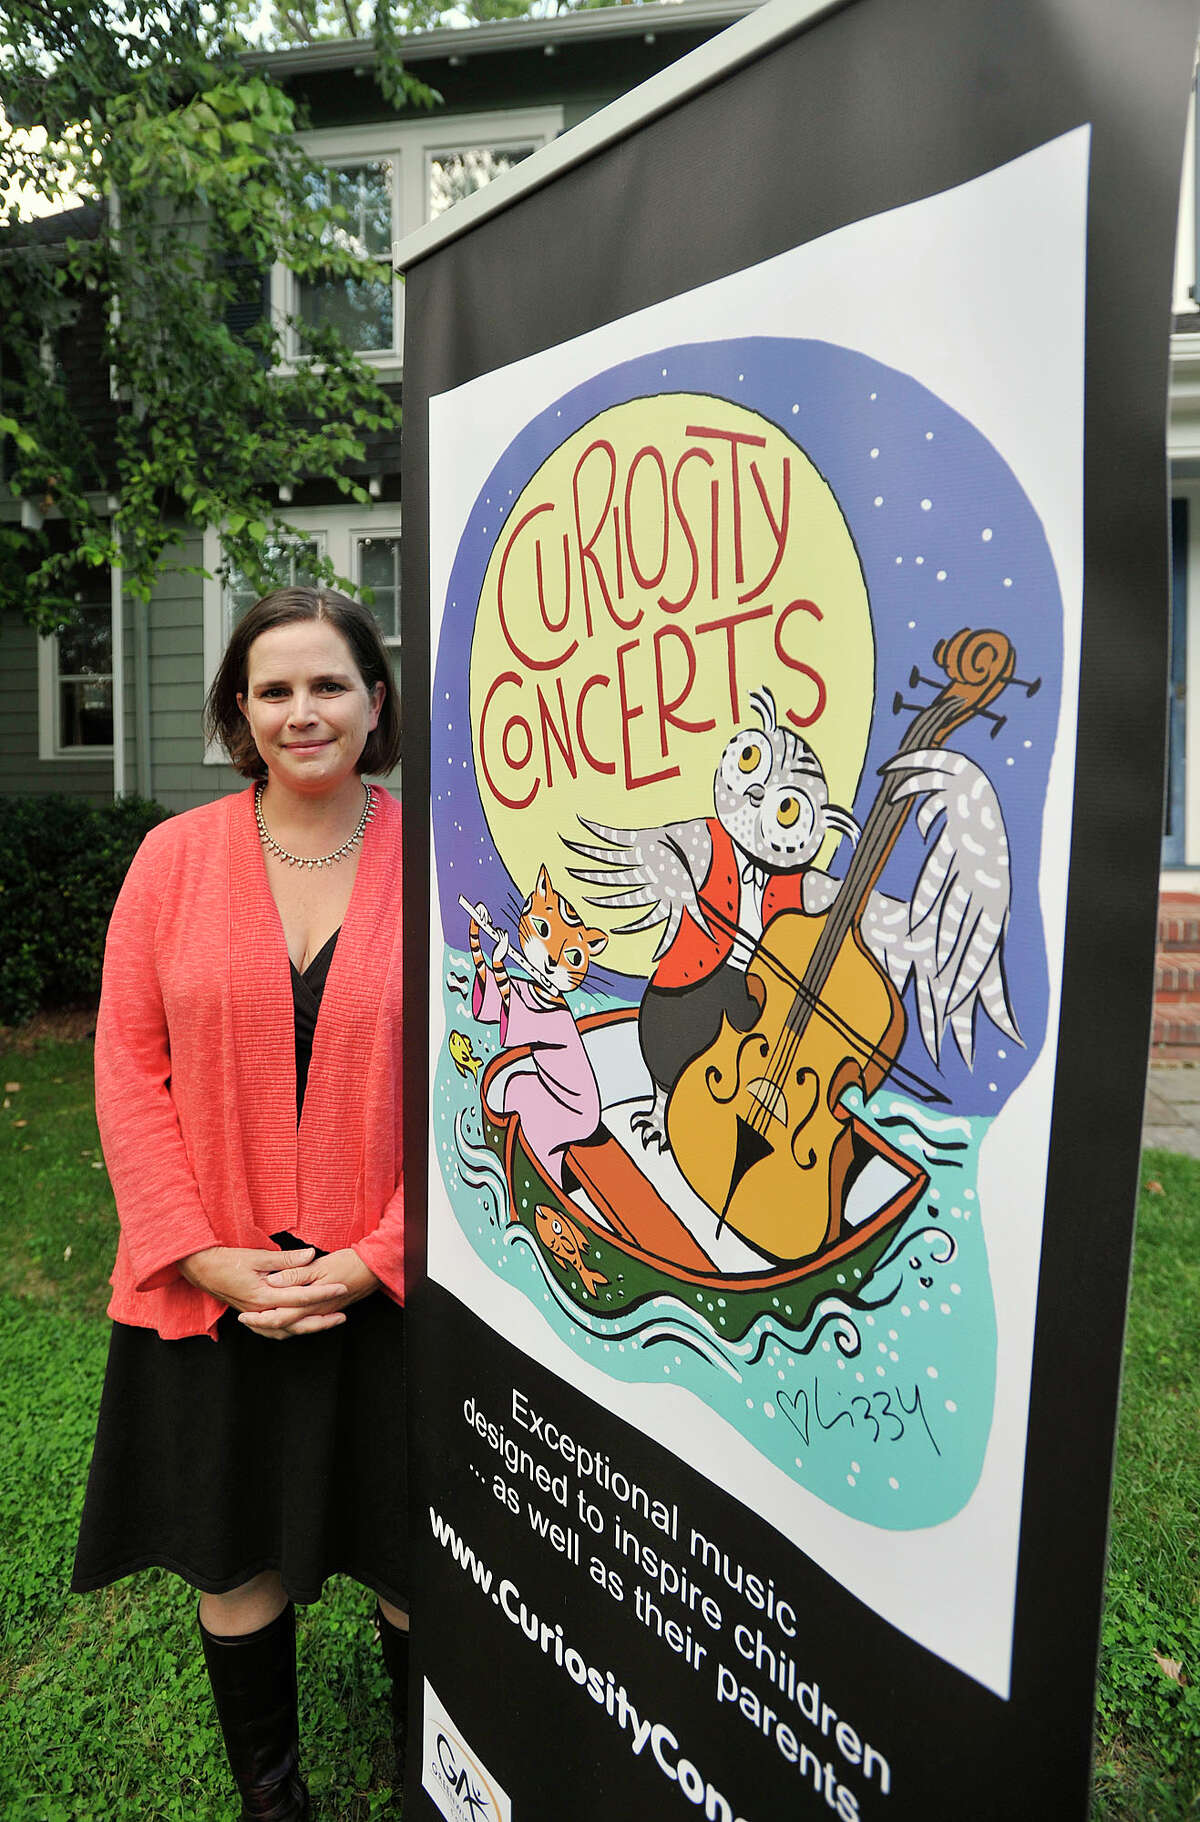 Shelly Cryer poses next to a banner displaying Curiosity Concerts in her front yard in Old Greenwich, Conn., on Thursday, Sept. 18, 2014. Shelly is the daughter-in-law of world famoous violinist Isaac Stern and is the producer of Curiosity Concerts, a free family concert she started in Greenwich.